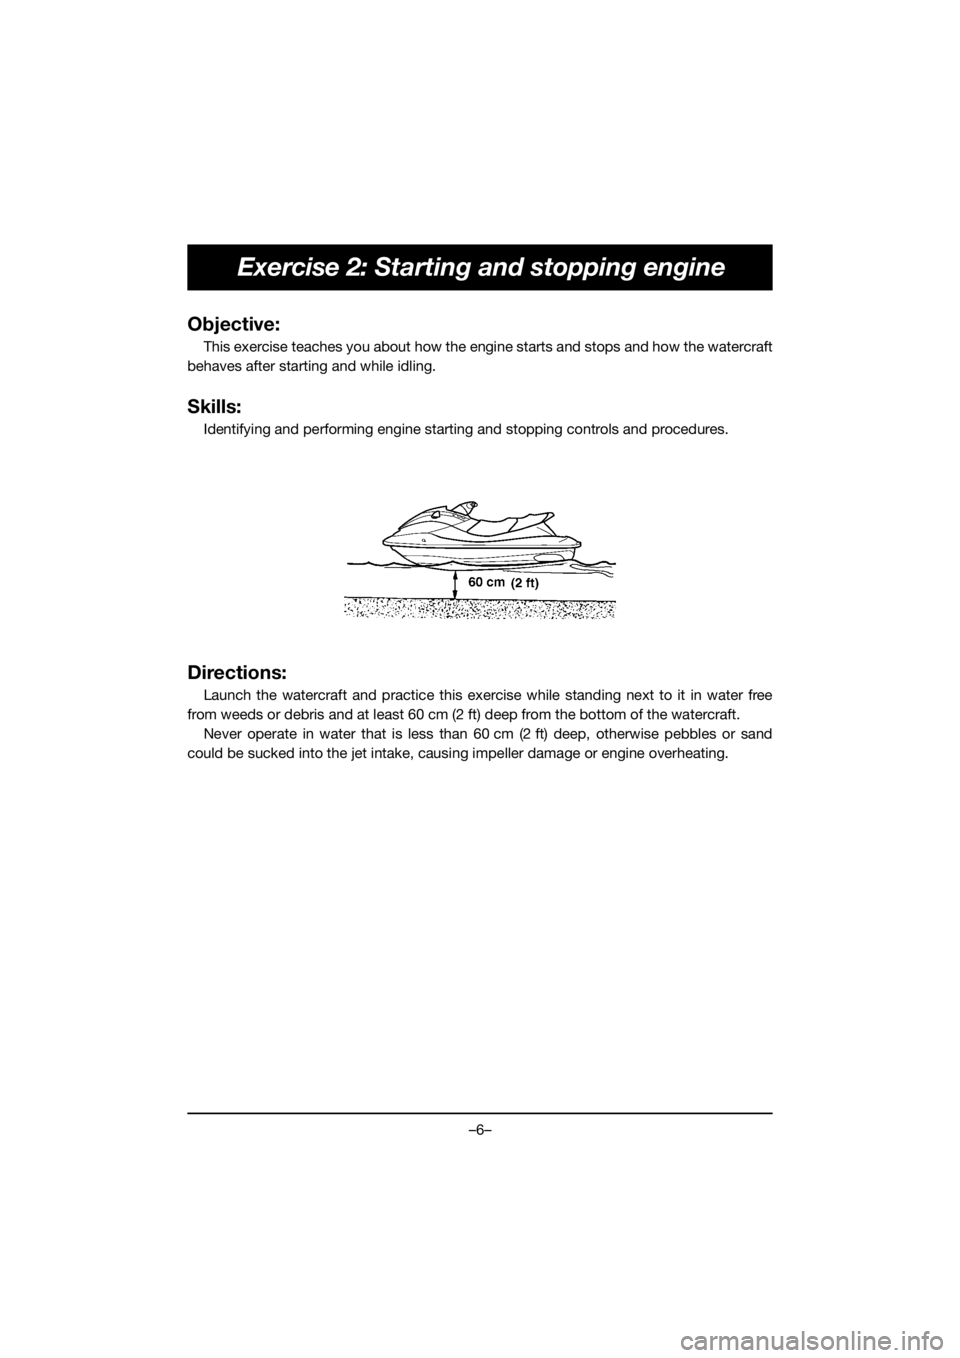 YAMAHA FX HO 2018  Manual de utilização (in Portuguese) –6–
Exercise 2: Starting and stopping engine
Objective:
This exercise teaches you about how the engine starts and stops and how the watercraft
behaves after starting and while idling.
Skills:
Iden